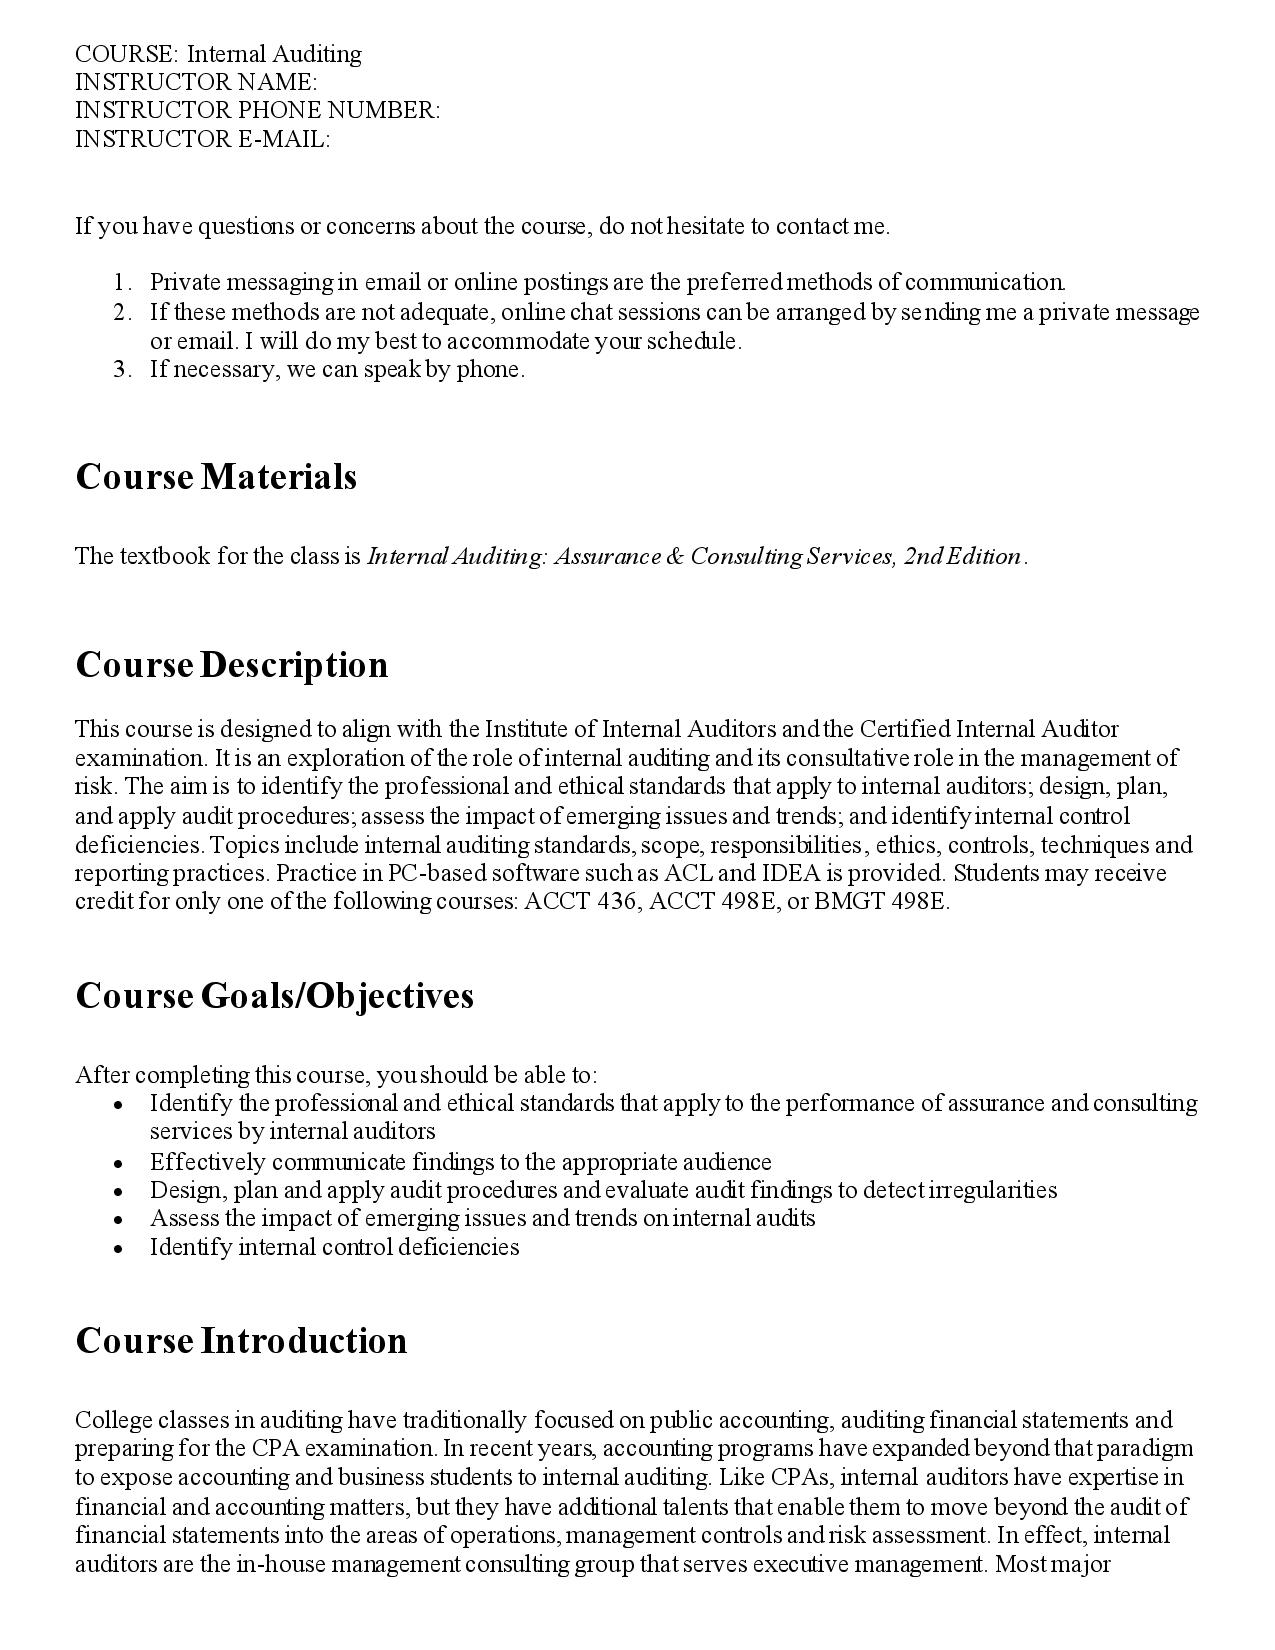 Screenshot of the first page of Introduction to Internal Auditing (Sample Syllabus)